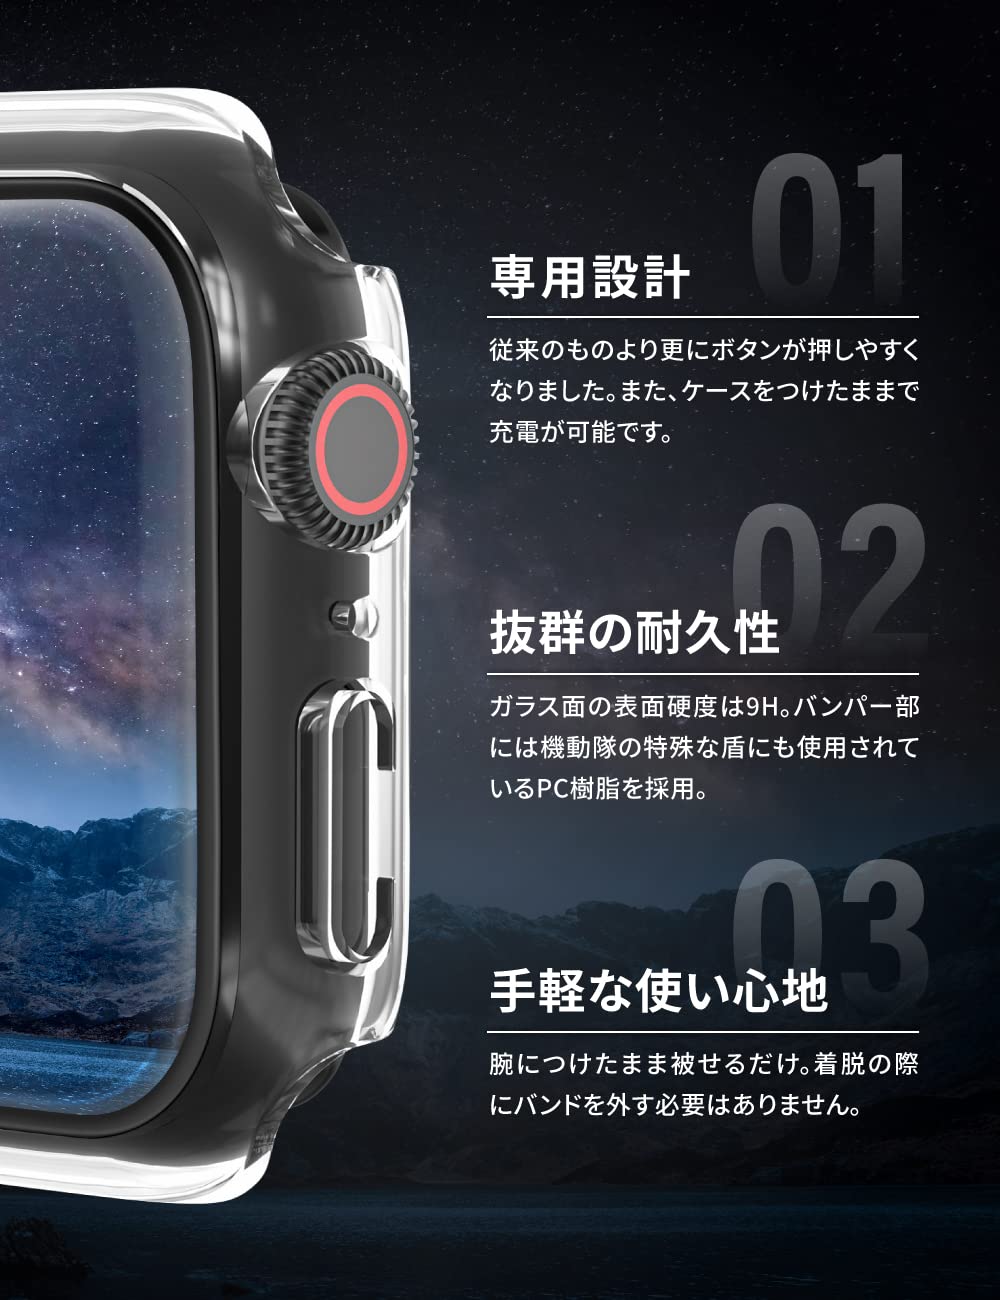 BARIOUS BARIGUARD3 for Apple Watch 45mm Protective Case Hard Case Matte Black for Apple Watch Series 8 Series 7